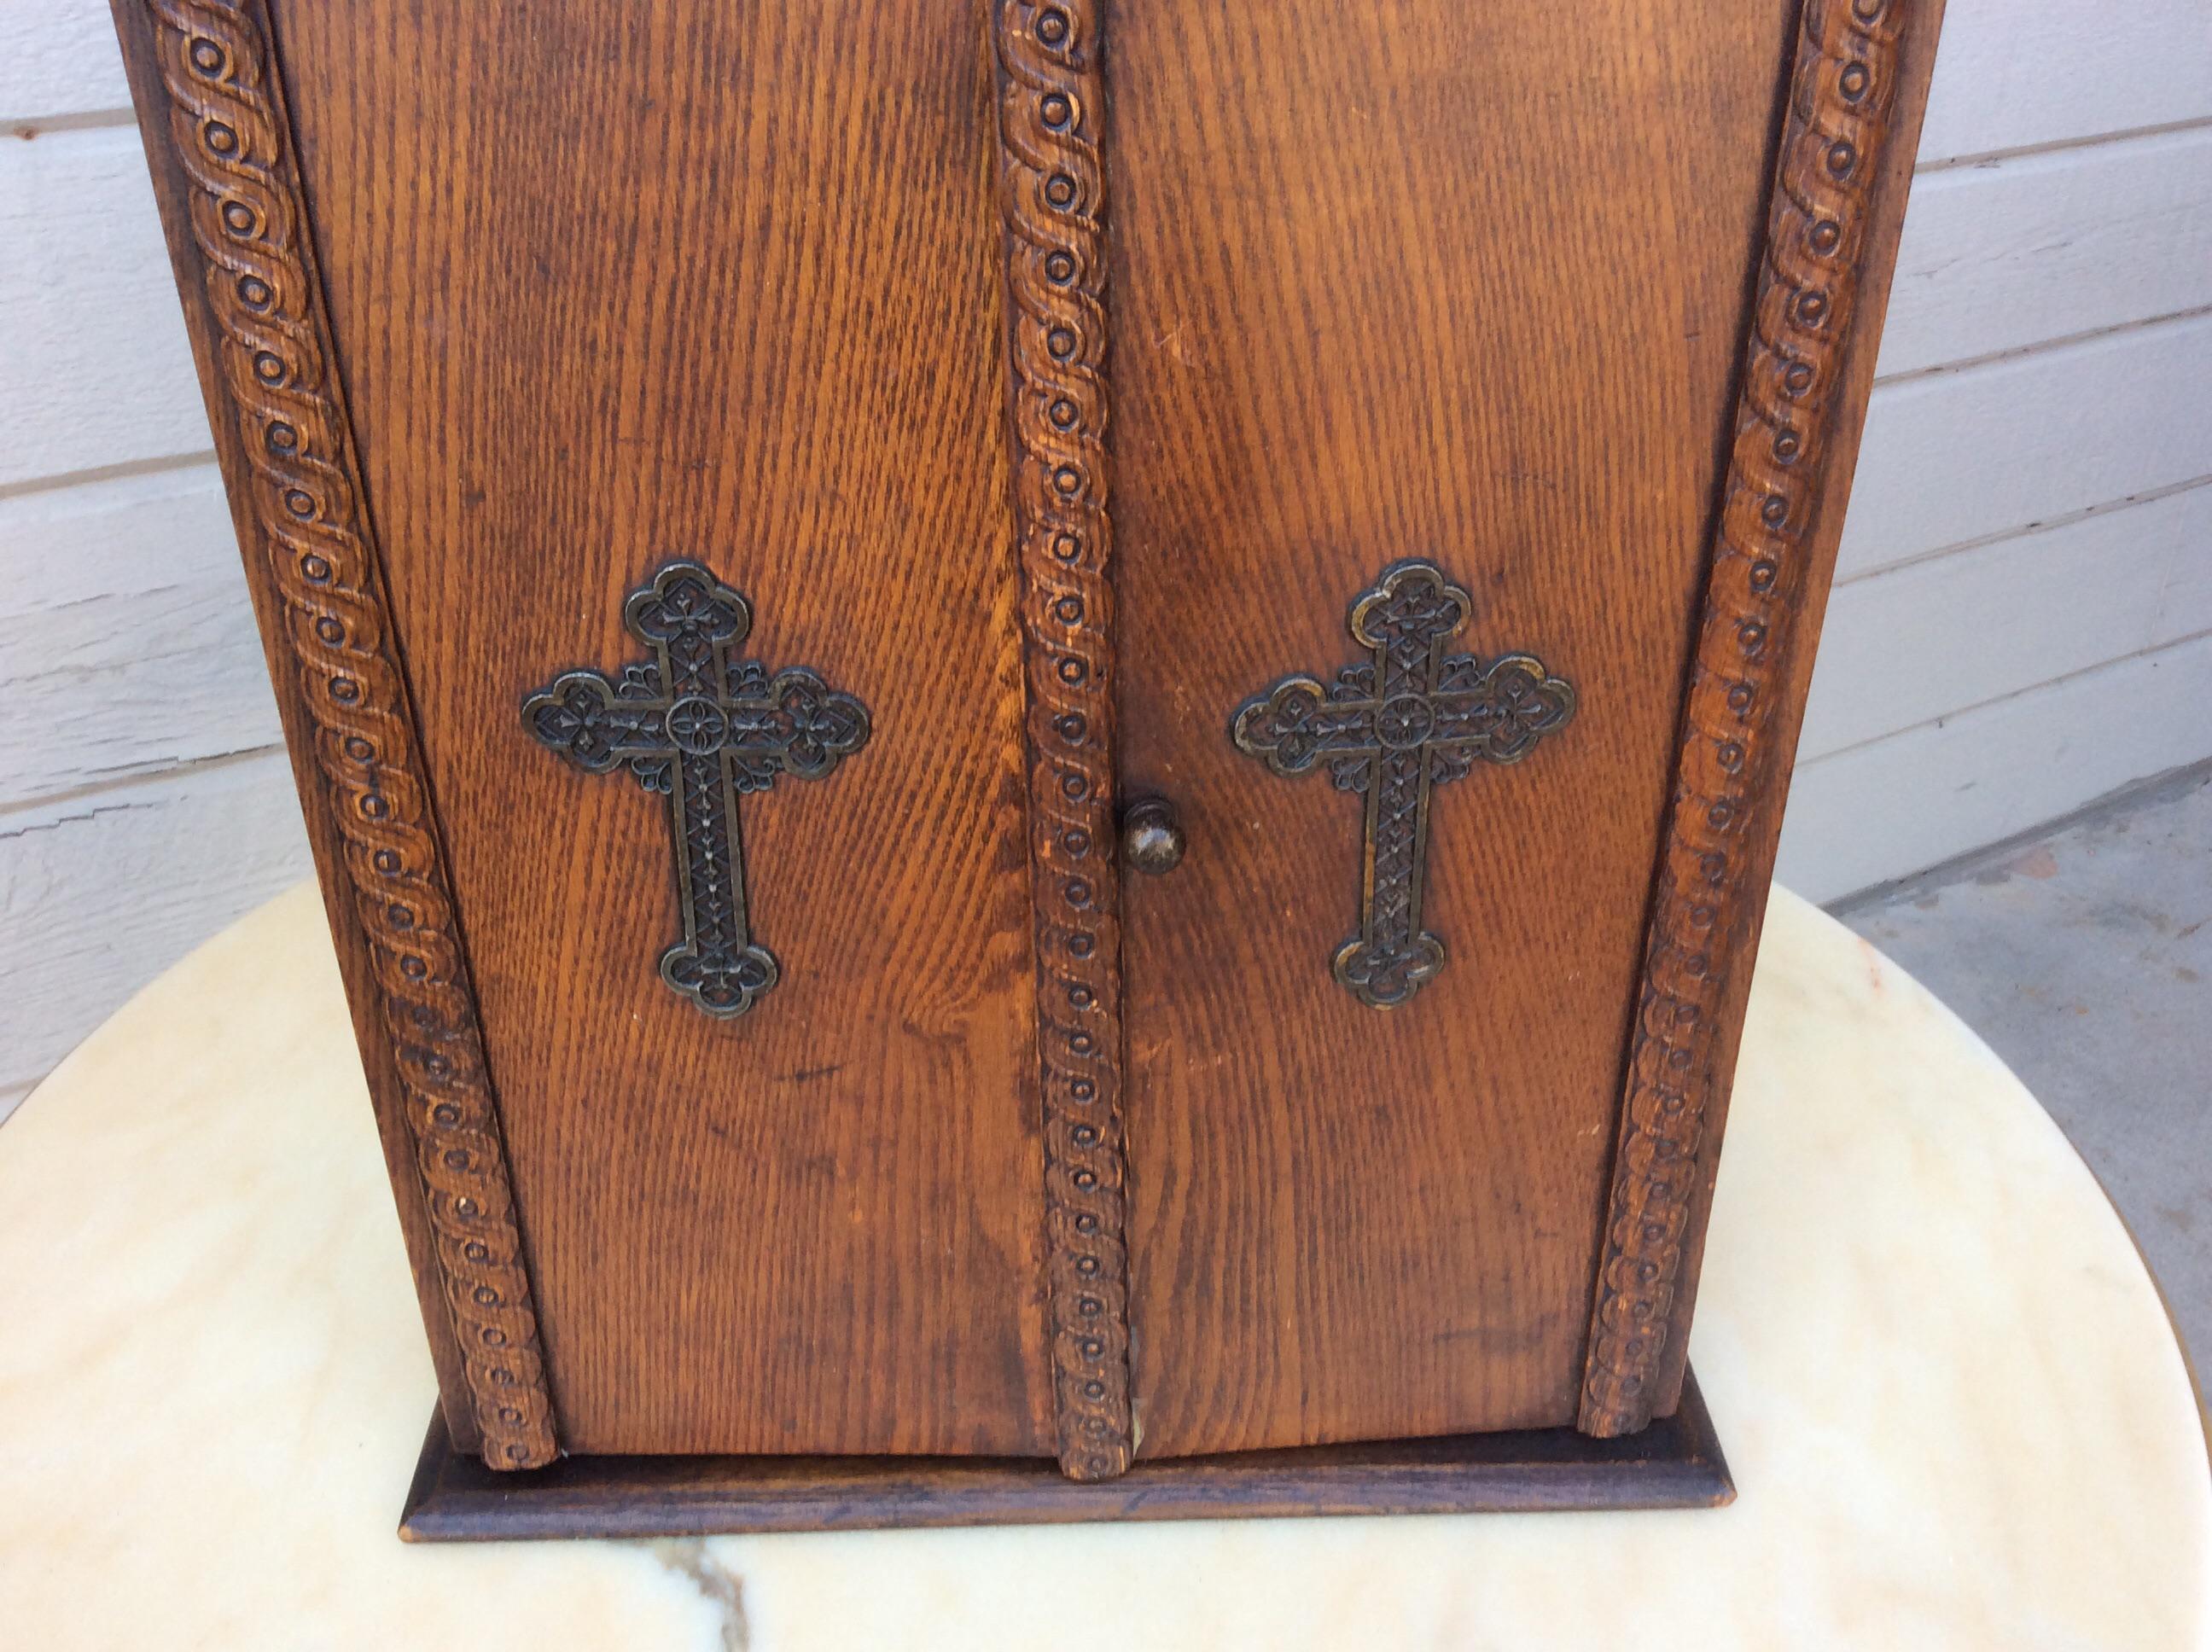 This Early 20th Century Wood Viaticum Cabinet and Home Altar Box is constructed with ornate details and two metal crosses on the front. This Alter Cabinet was once used for The Last Rites of the Catholic Church and contained the necessary articles